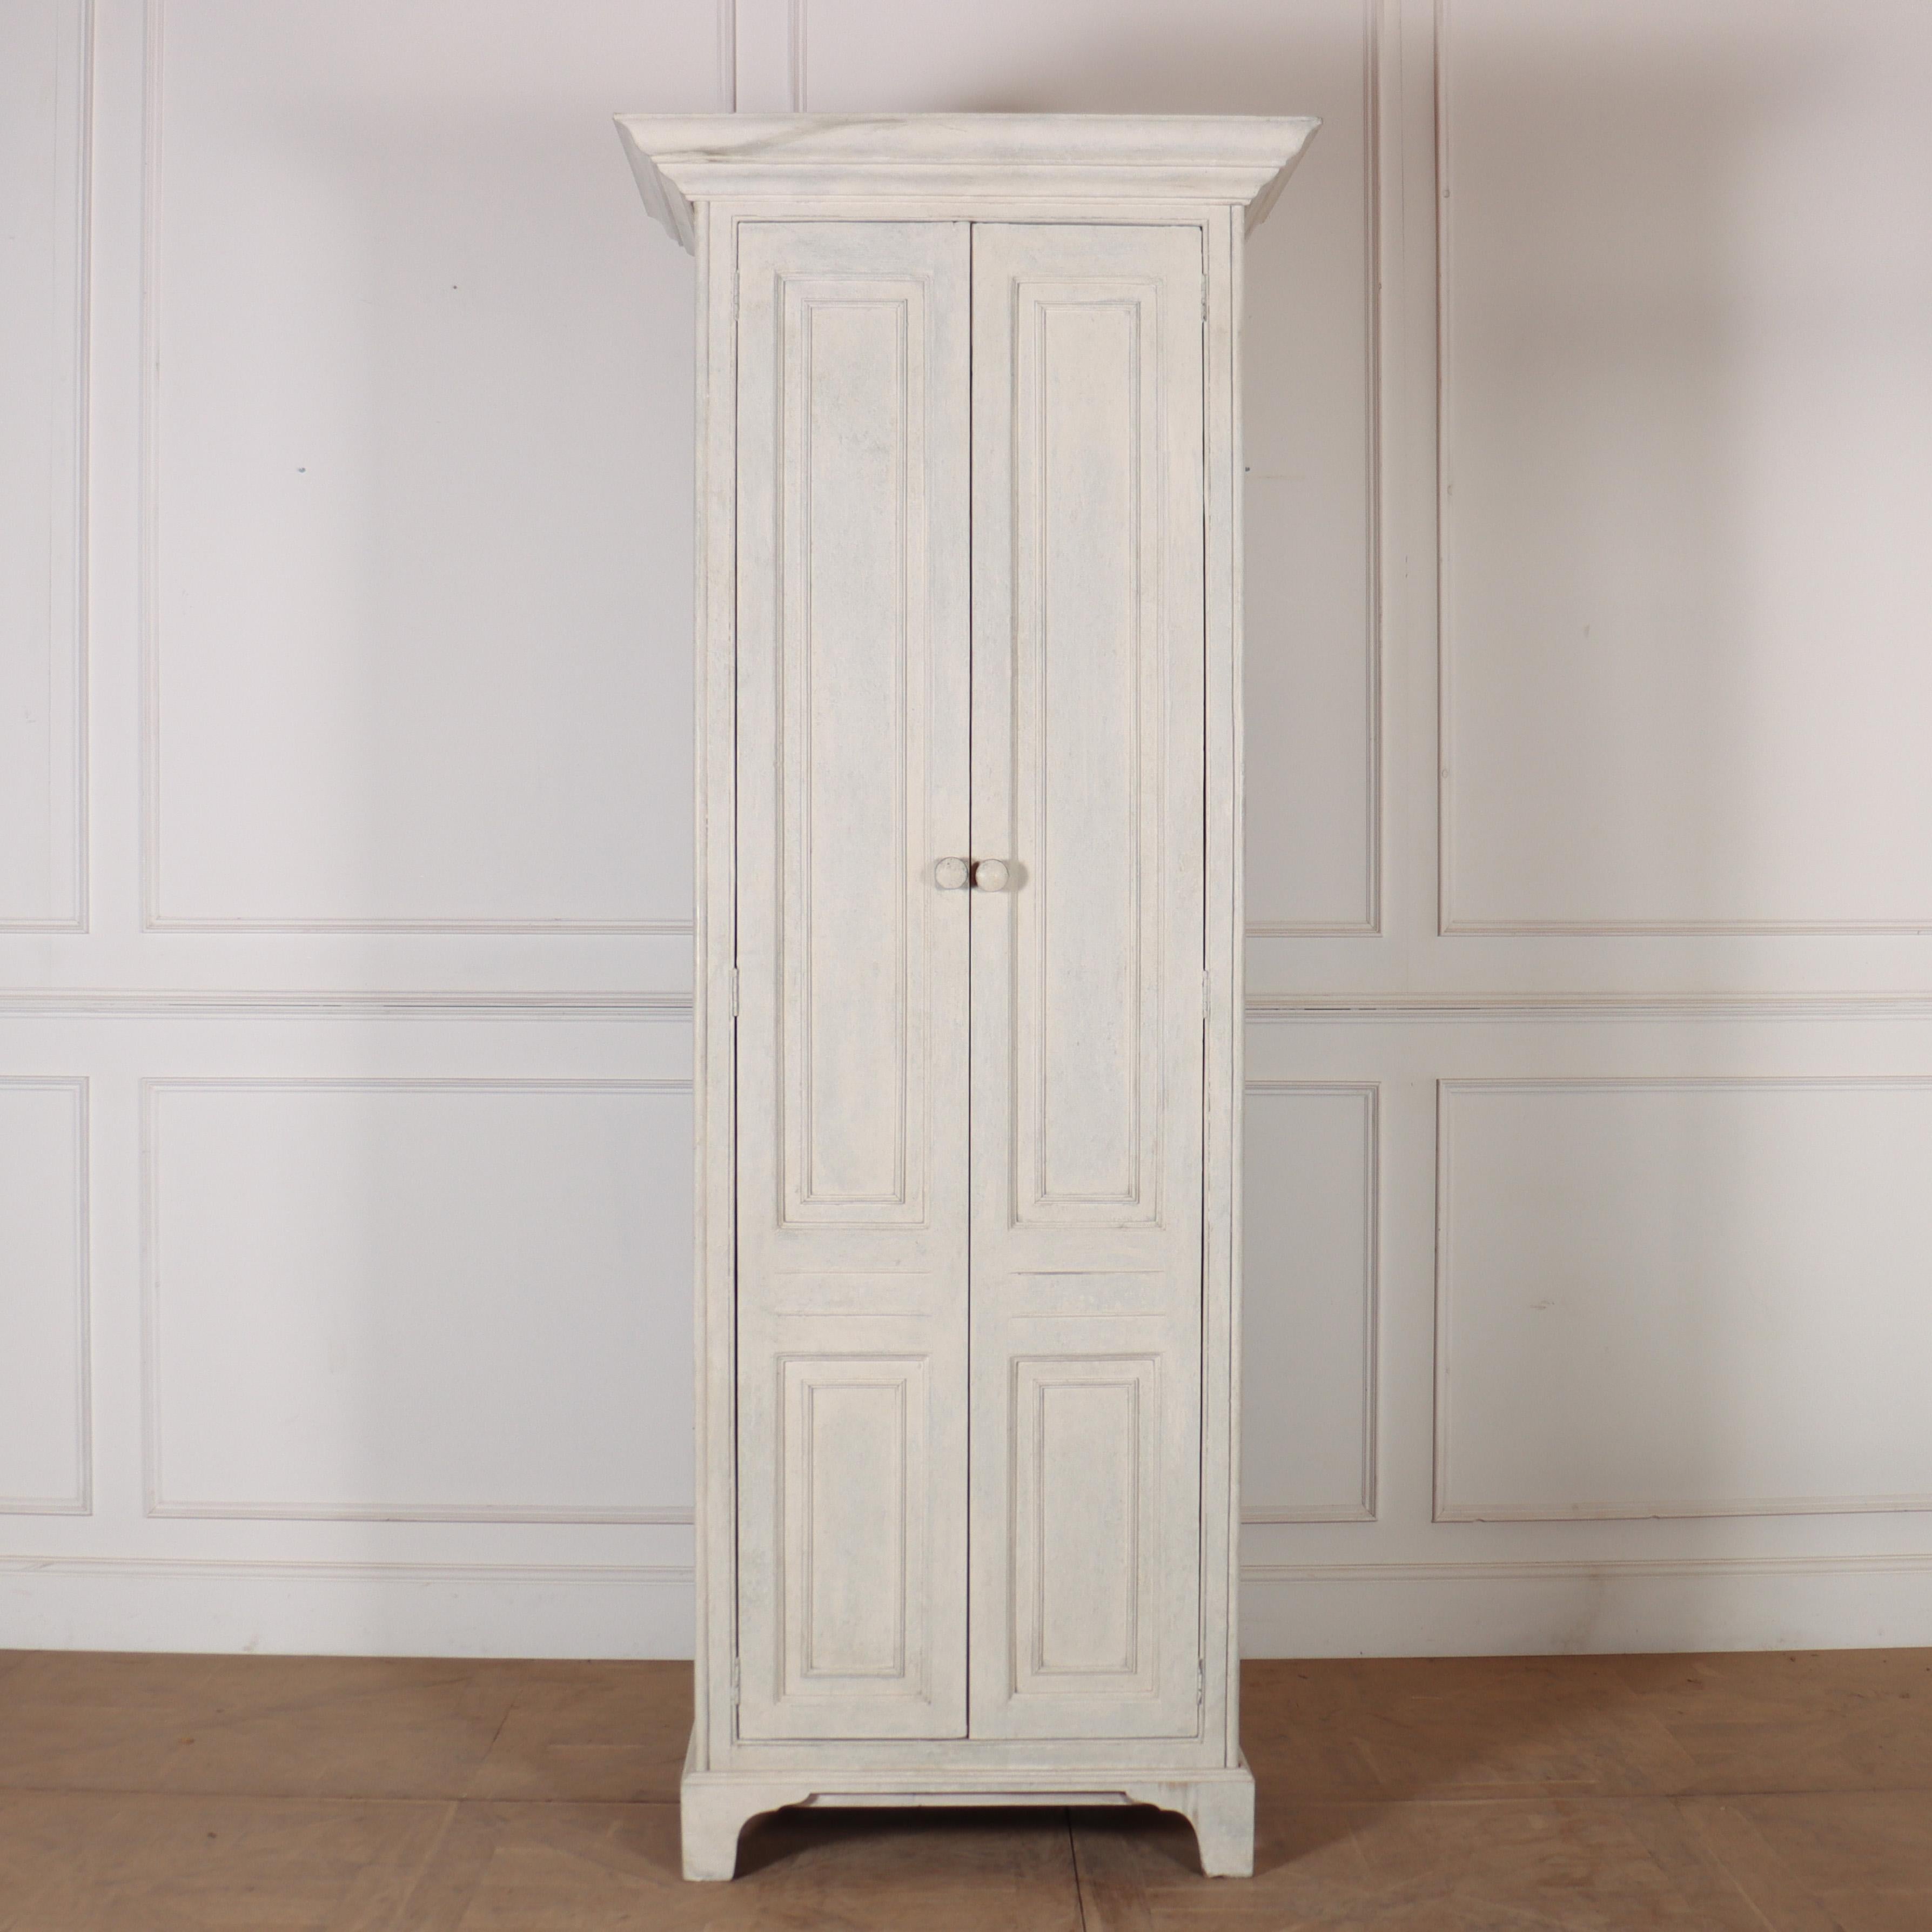 19th C English painted pine two door shelved linen cupboard. 1890.

Reference: 7969

Dimensions
38 inches (97 cms) Wide
25 inches (64 cms) Deep
95.5 inches (243 cms) High